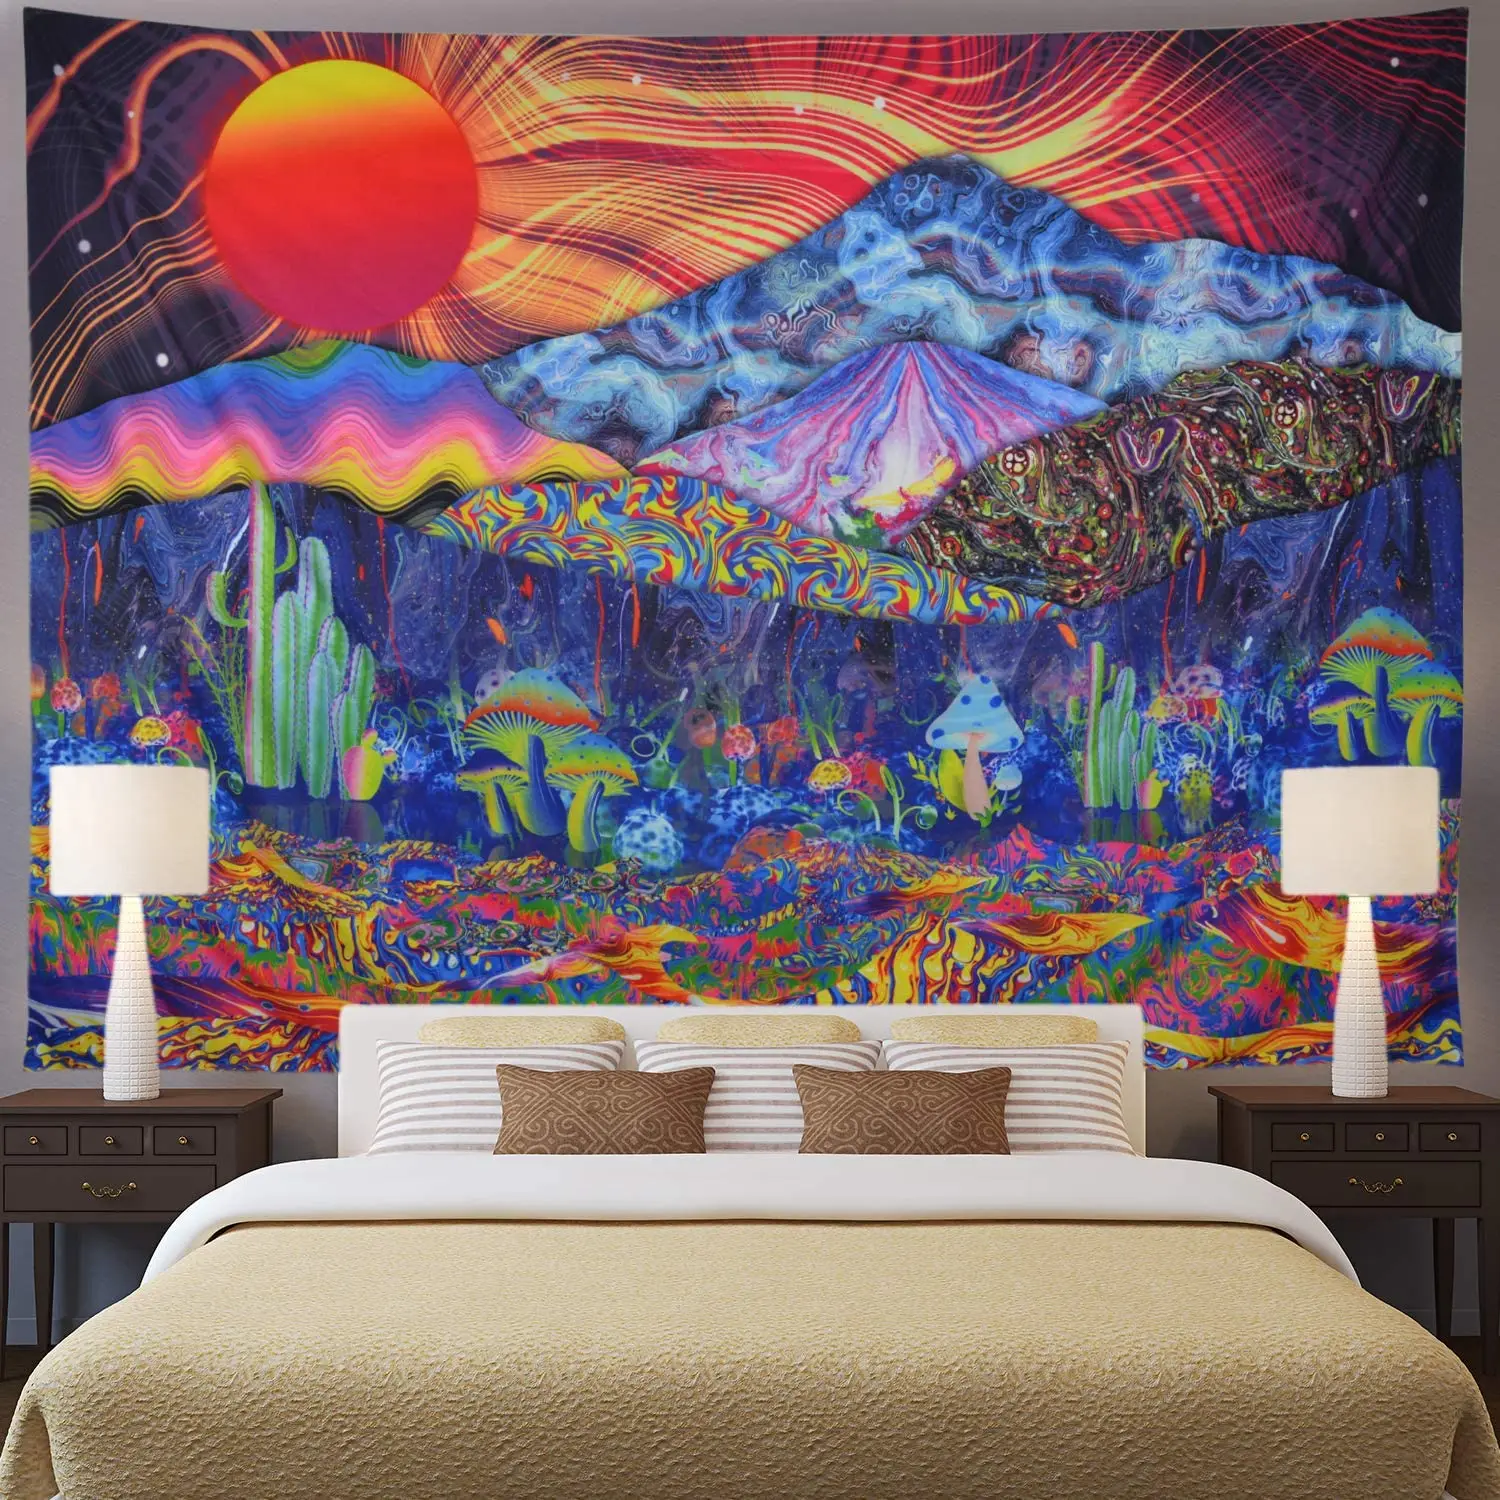 

Tapestry Psychedelic Sun Tapestry Colorful Mushroom Tapestry Hippie Waves Abstract Wall Tapestry for Bedroom Living Room